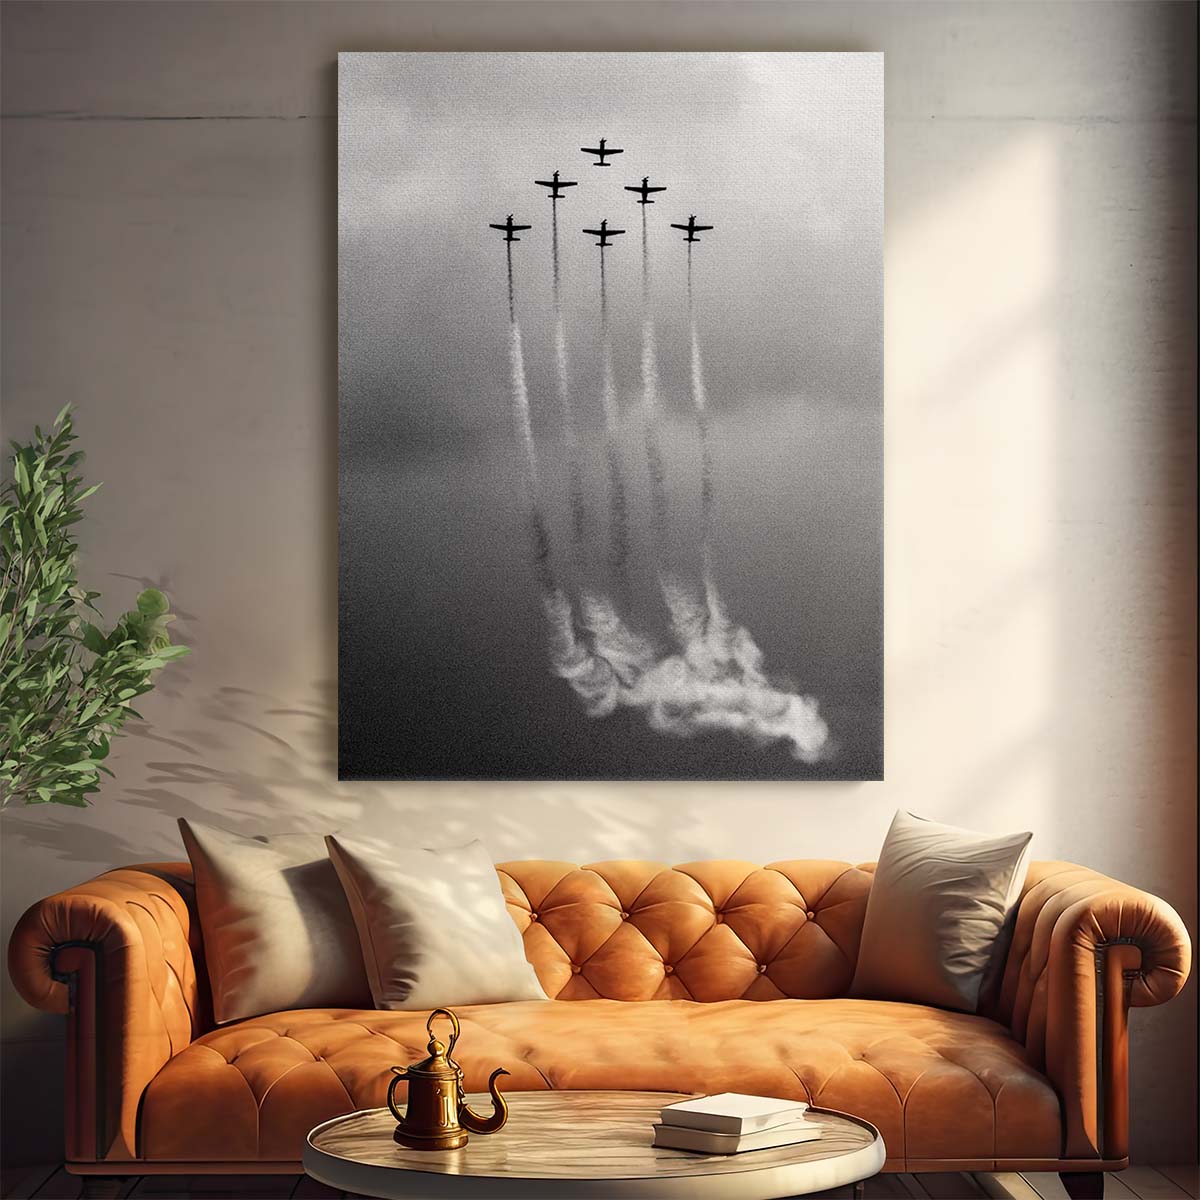 Action-Packed Monochrome Jet Formation Sky Photography Wall Art by Luxuriance Designs, made in USA